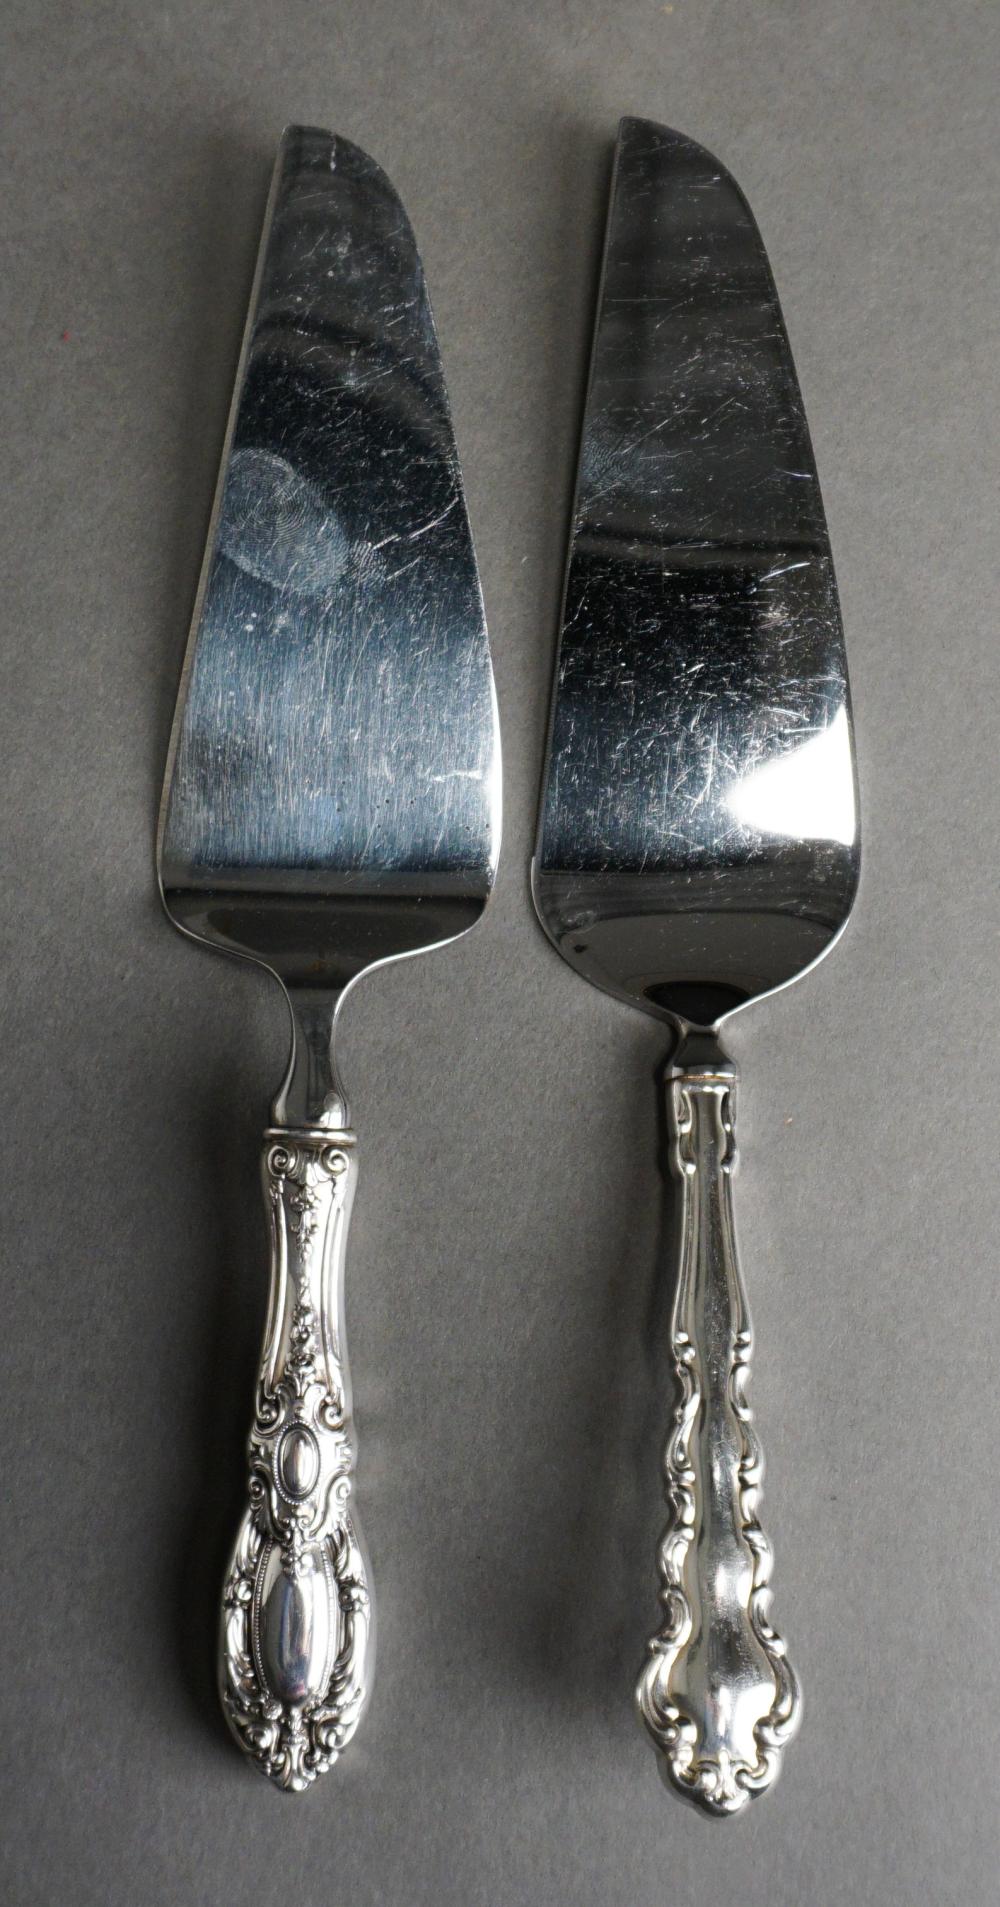 TWO STERLING SILVER HANDLED SERVERSTwo 32e8fa